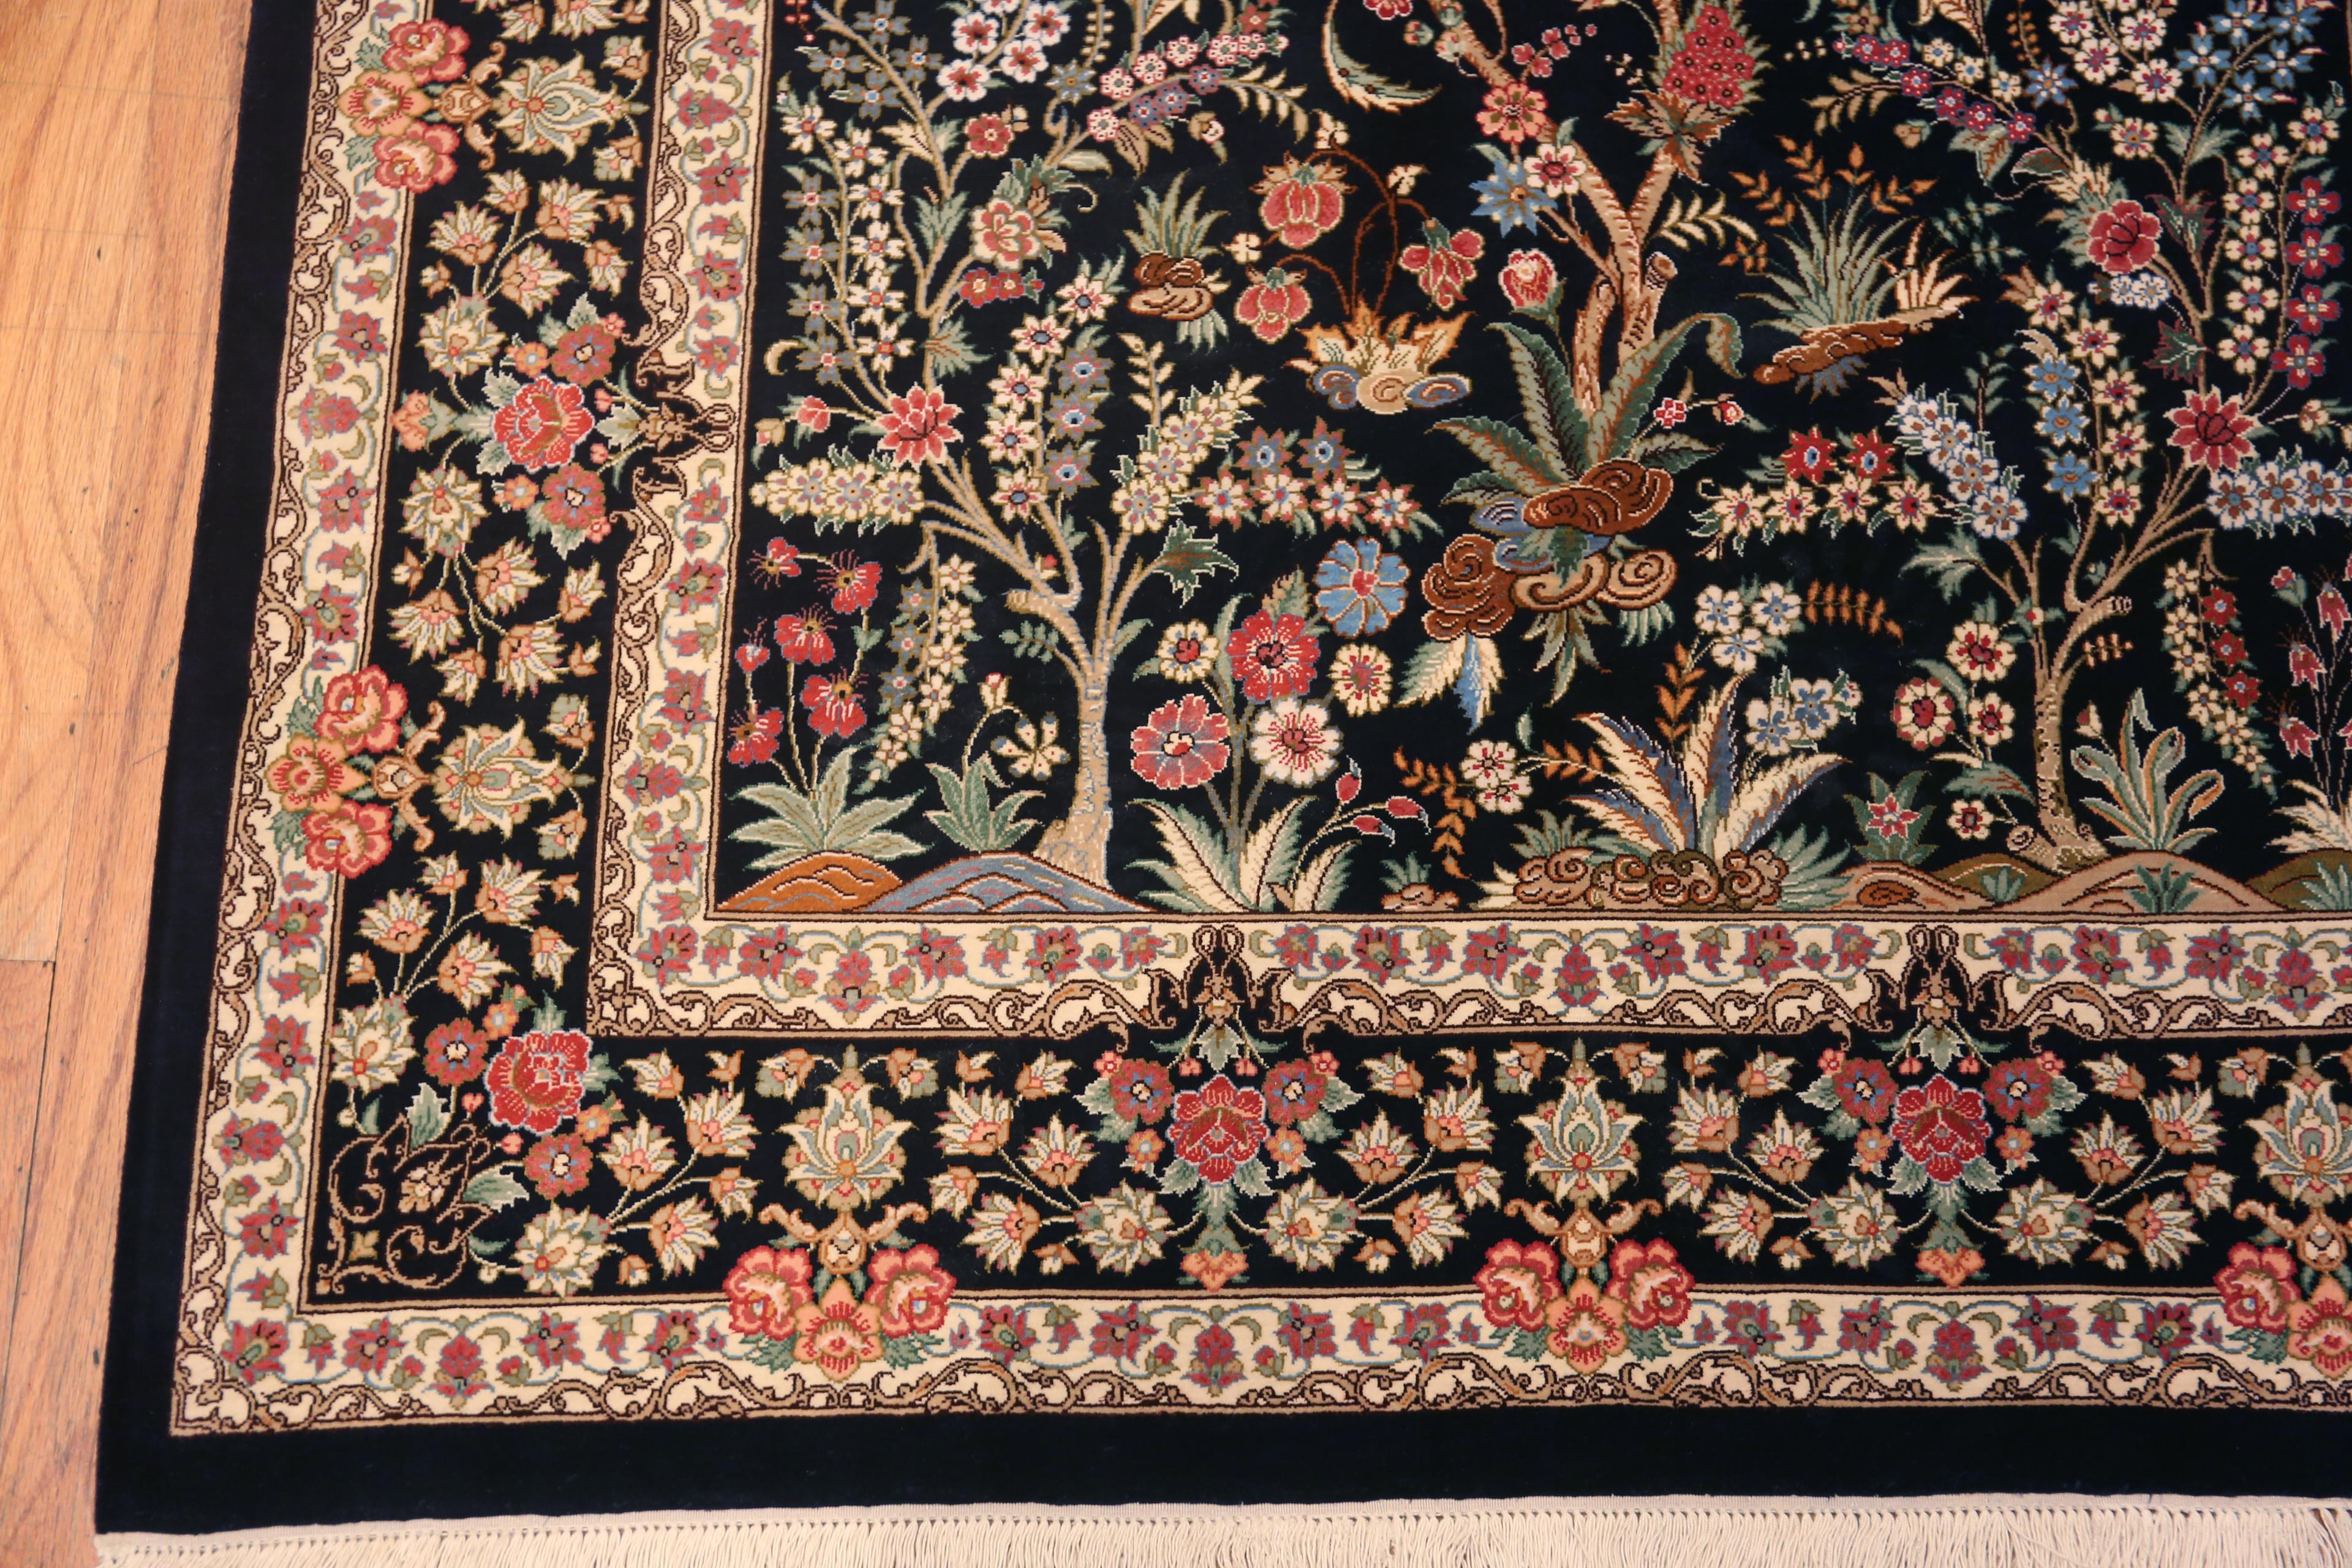 20th Century Small Size Floral Design Luxurious Vintage Persian Silk Qum Rug 3'4